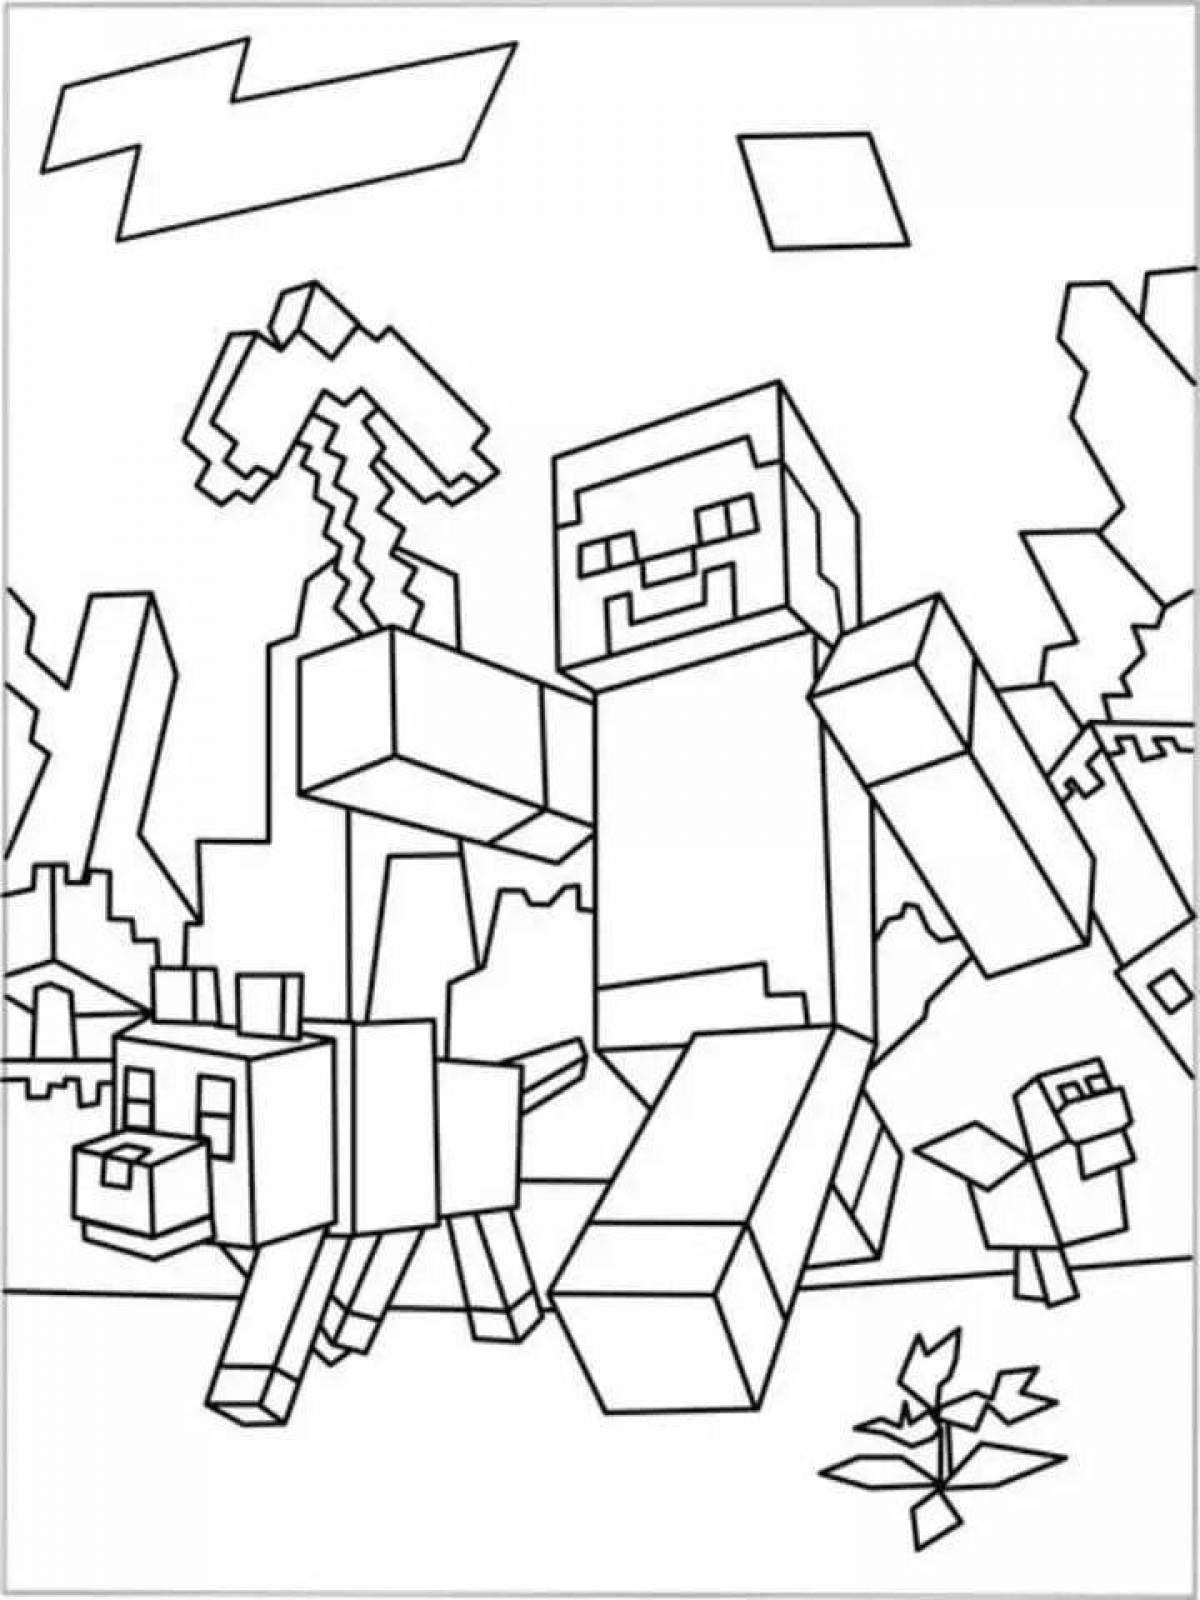 Exciting coloring minecraft cool